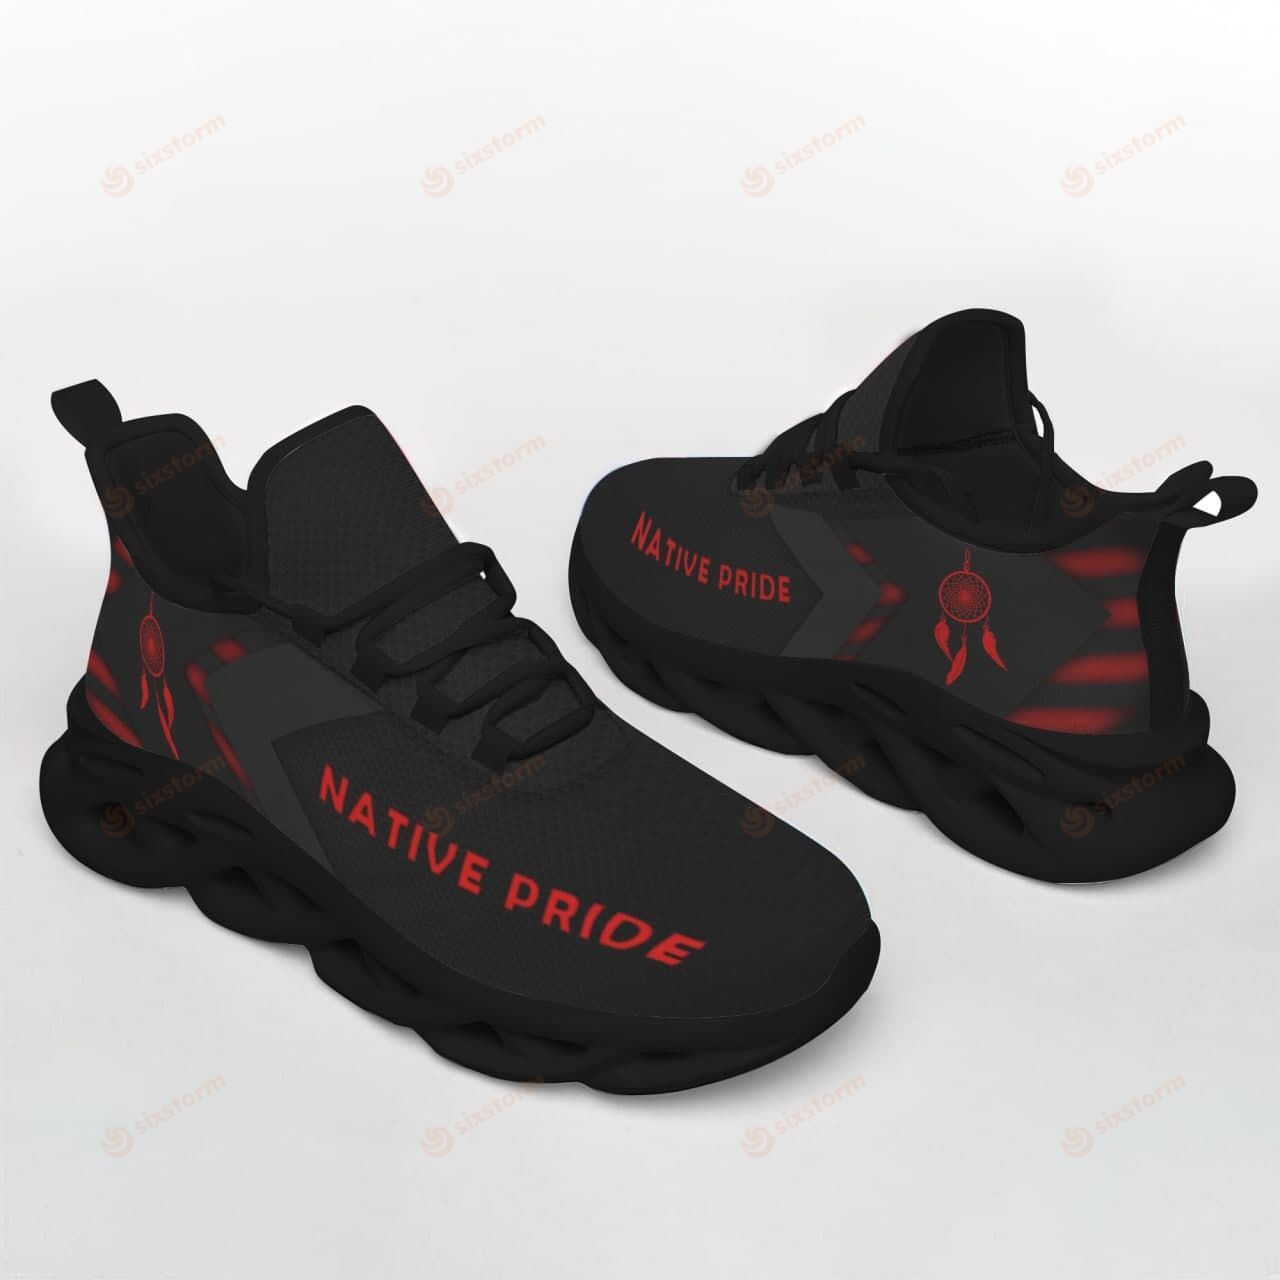 Native Pride clunky max soul shoes 2